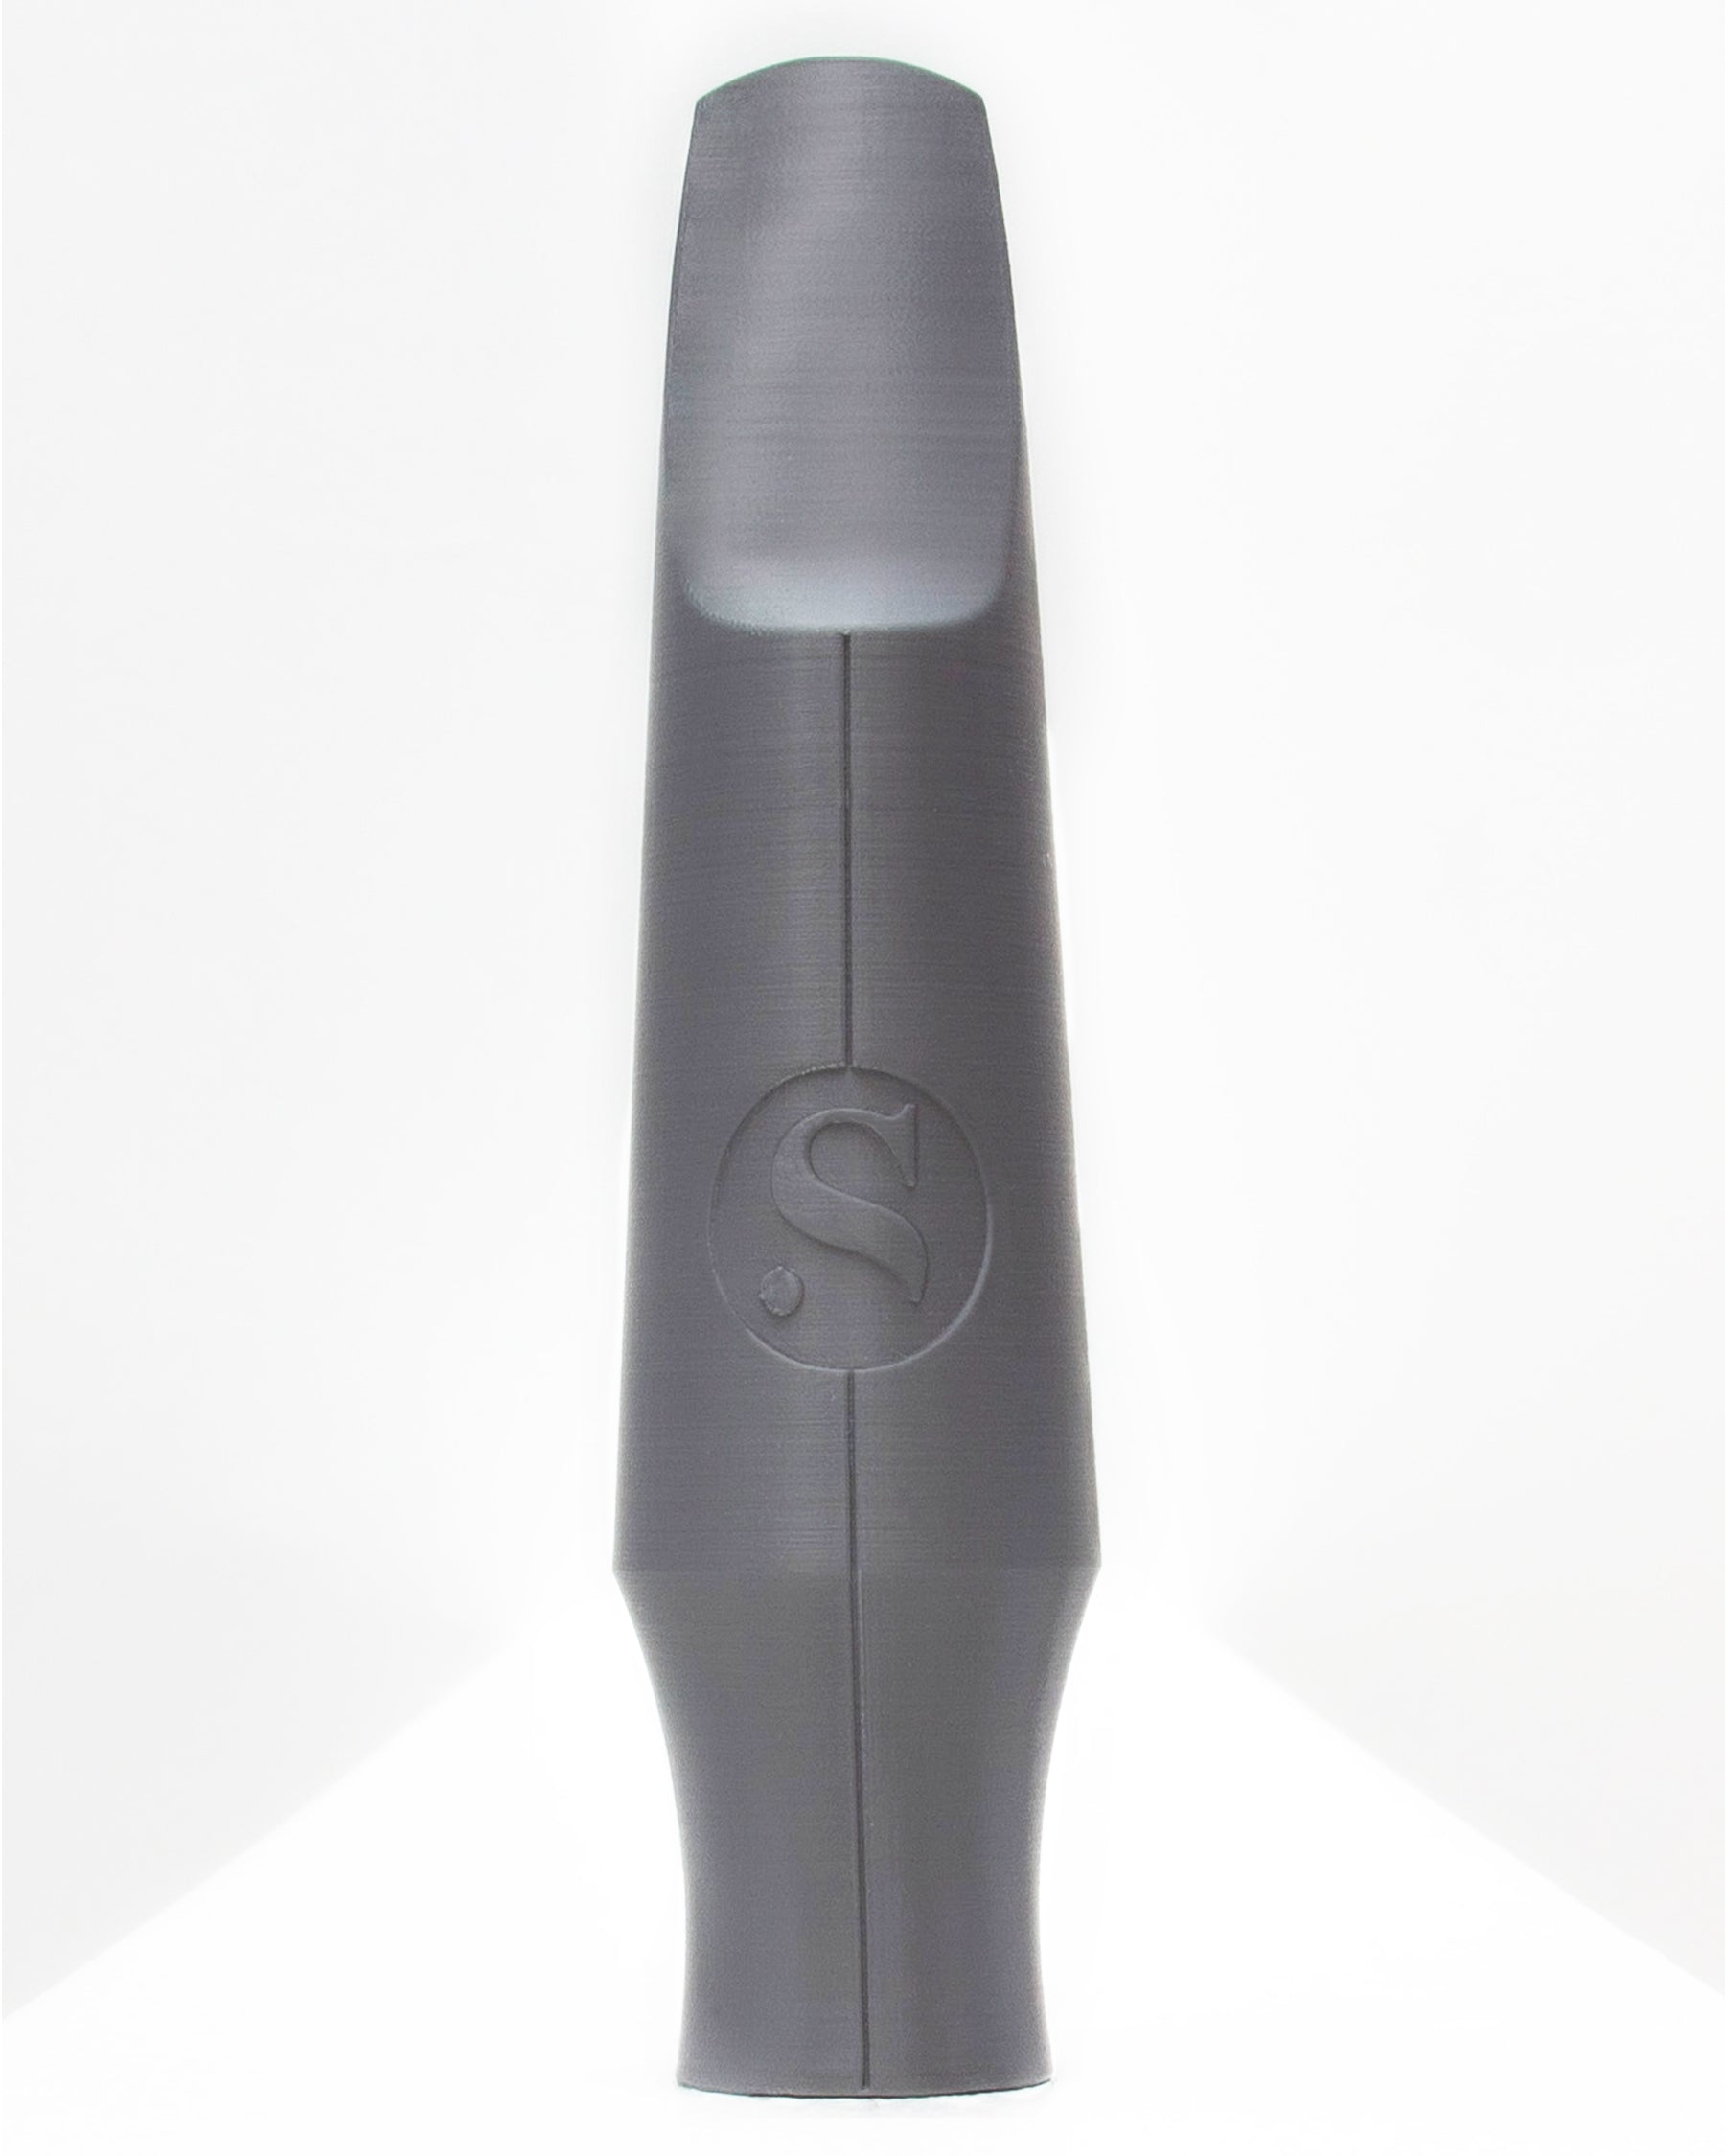 Baritone Signature Saxophone mouthpiece - Michael Wilbur by Syos - 9 / Anthracite Metal